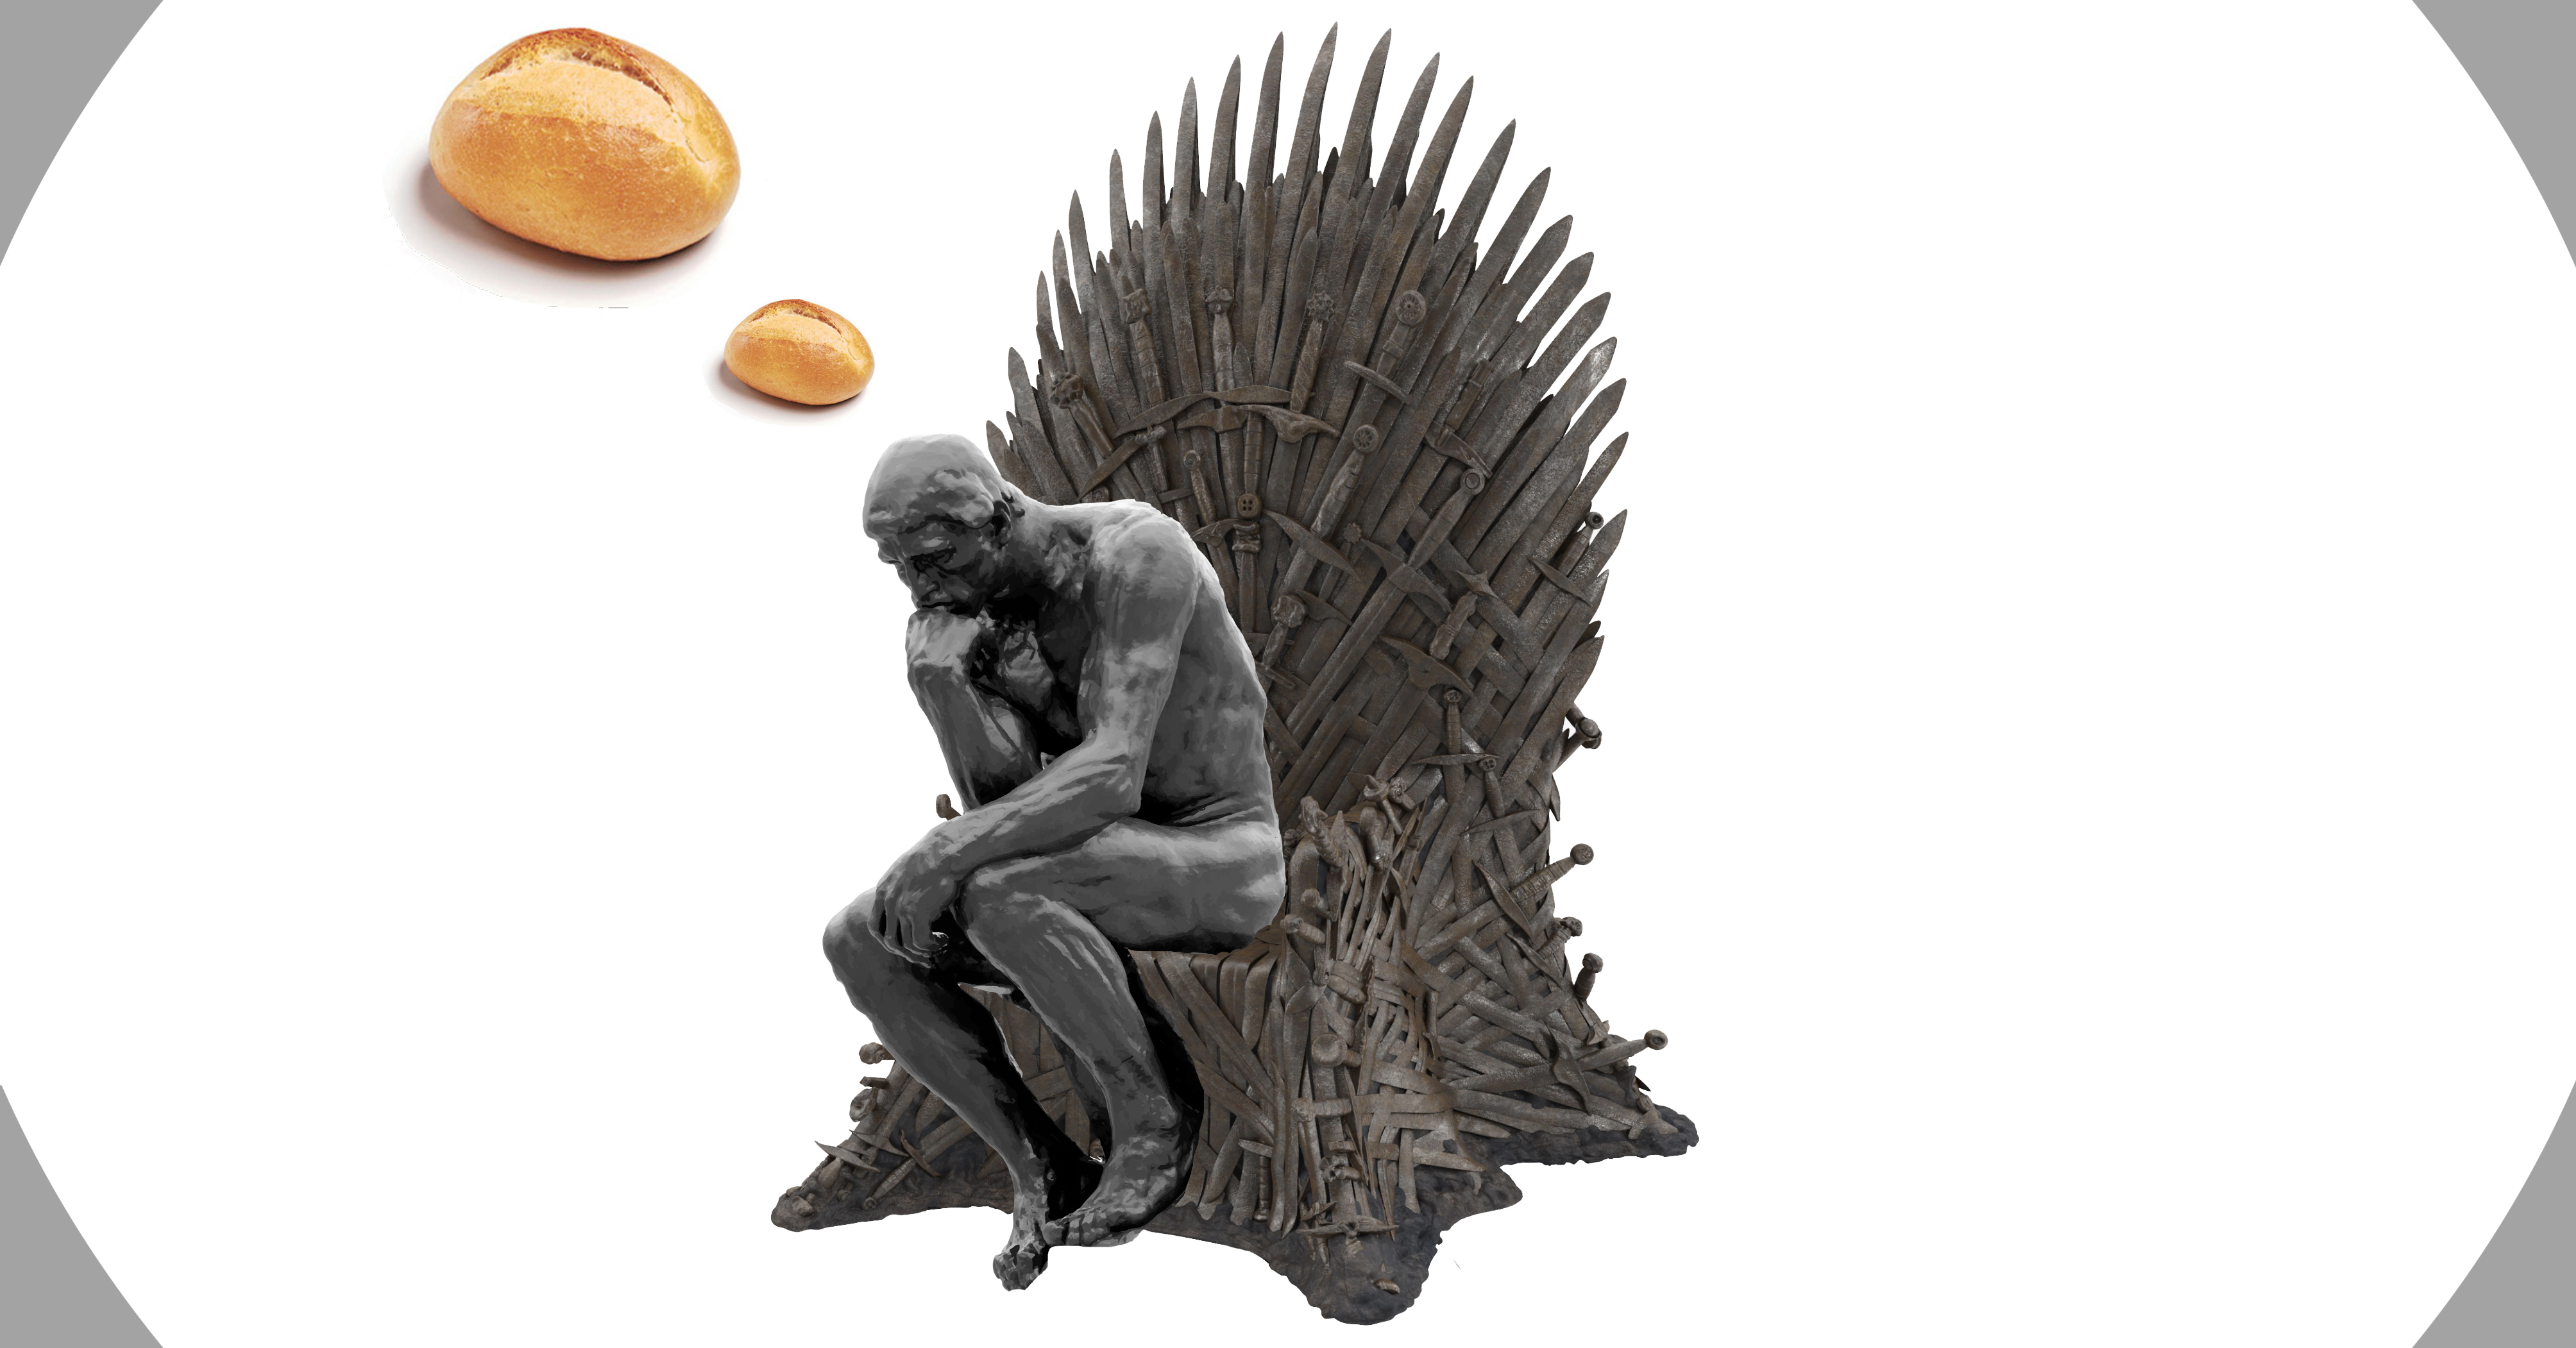 What can Game of Thrones teach us about moral philosophy?